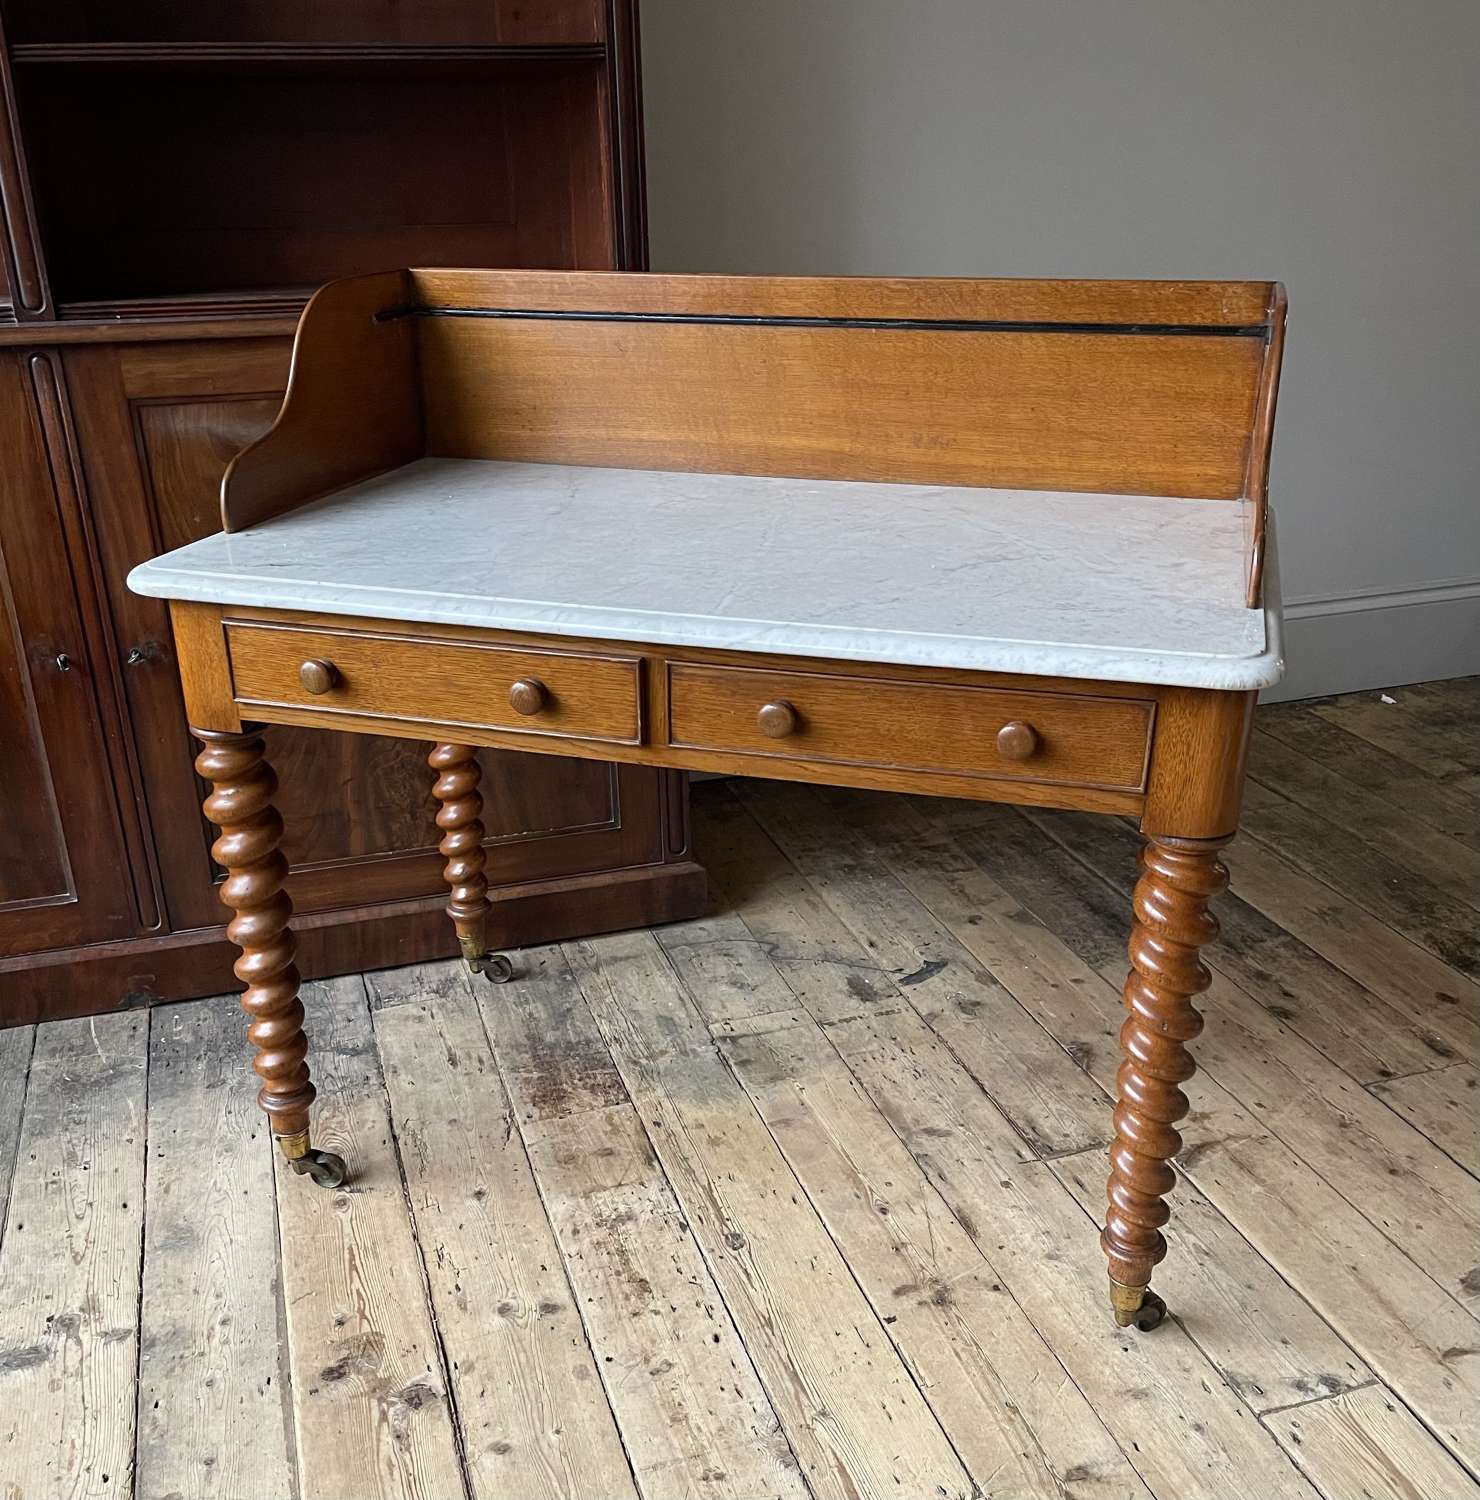 19th century wash stand attributed to Hindley & Sons.